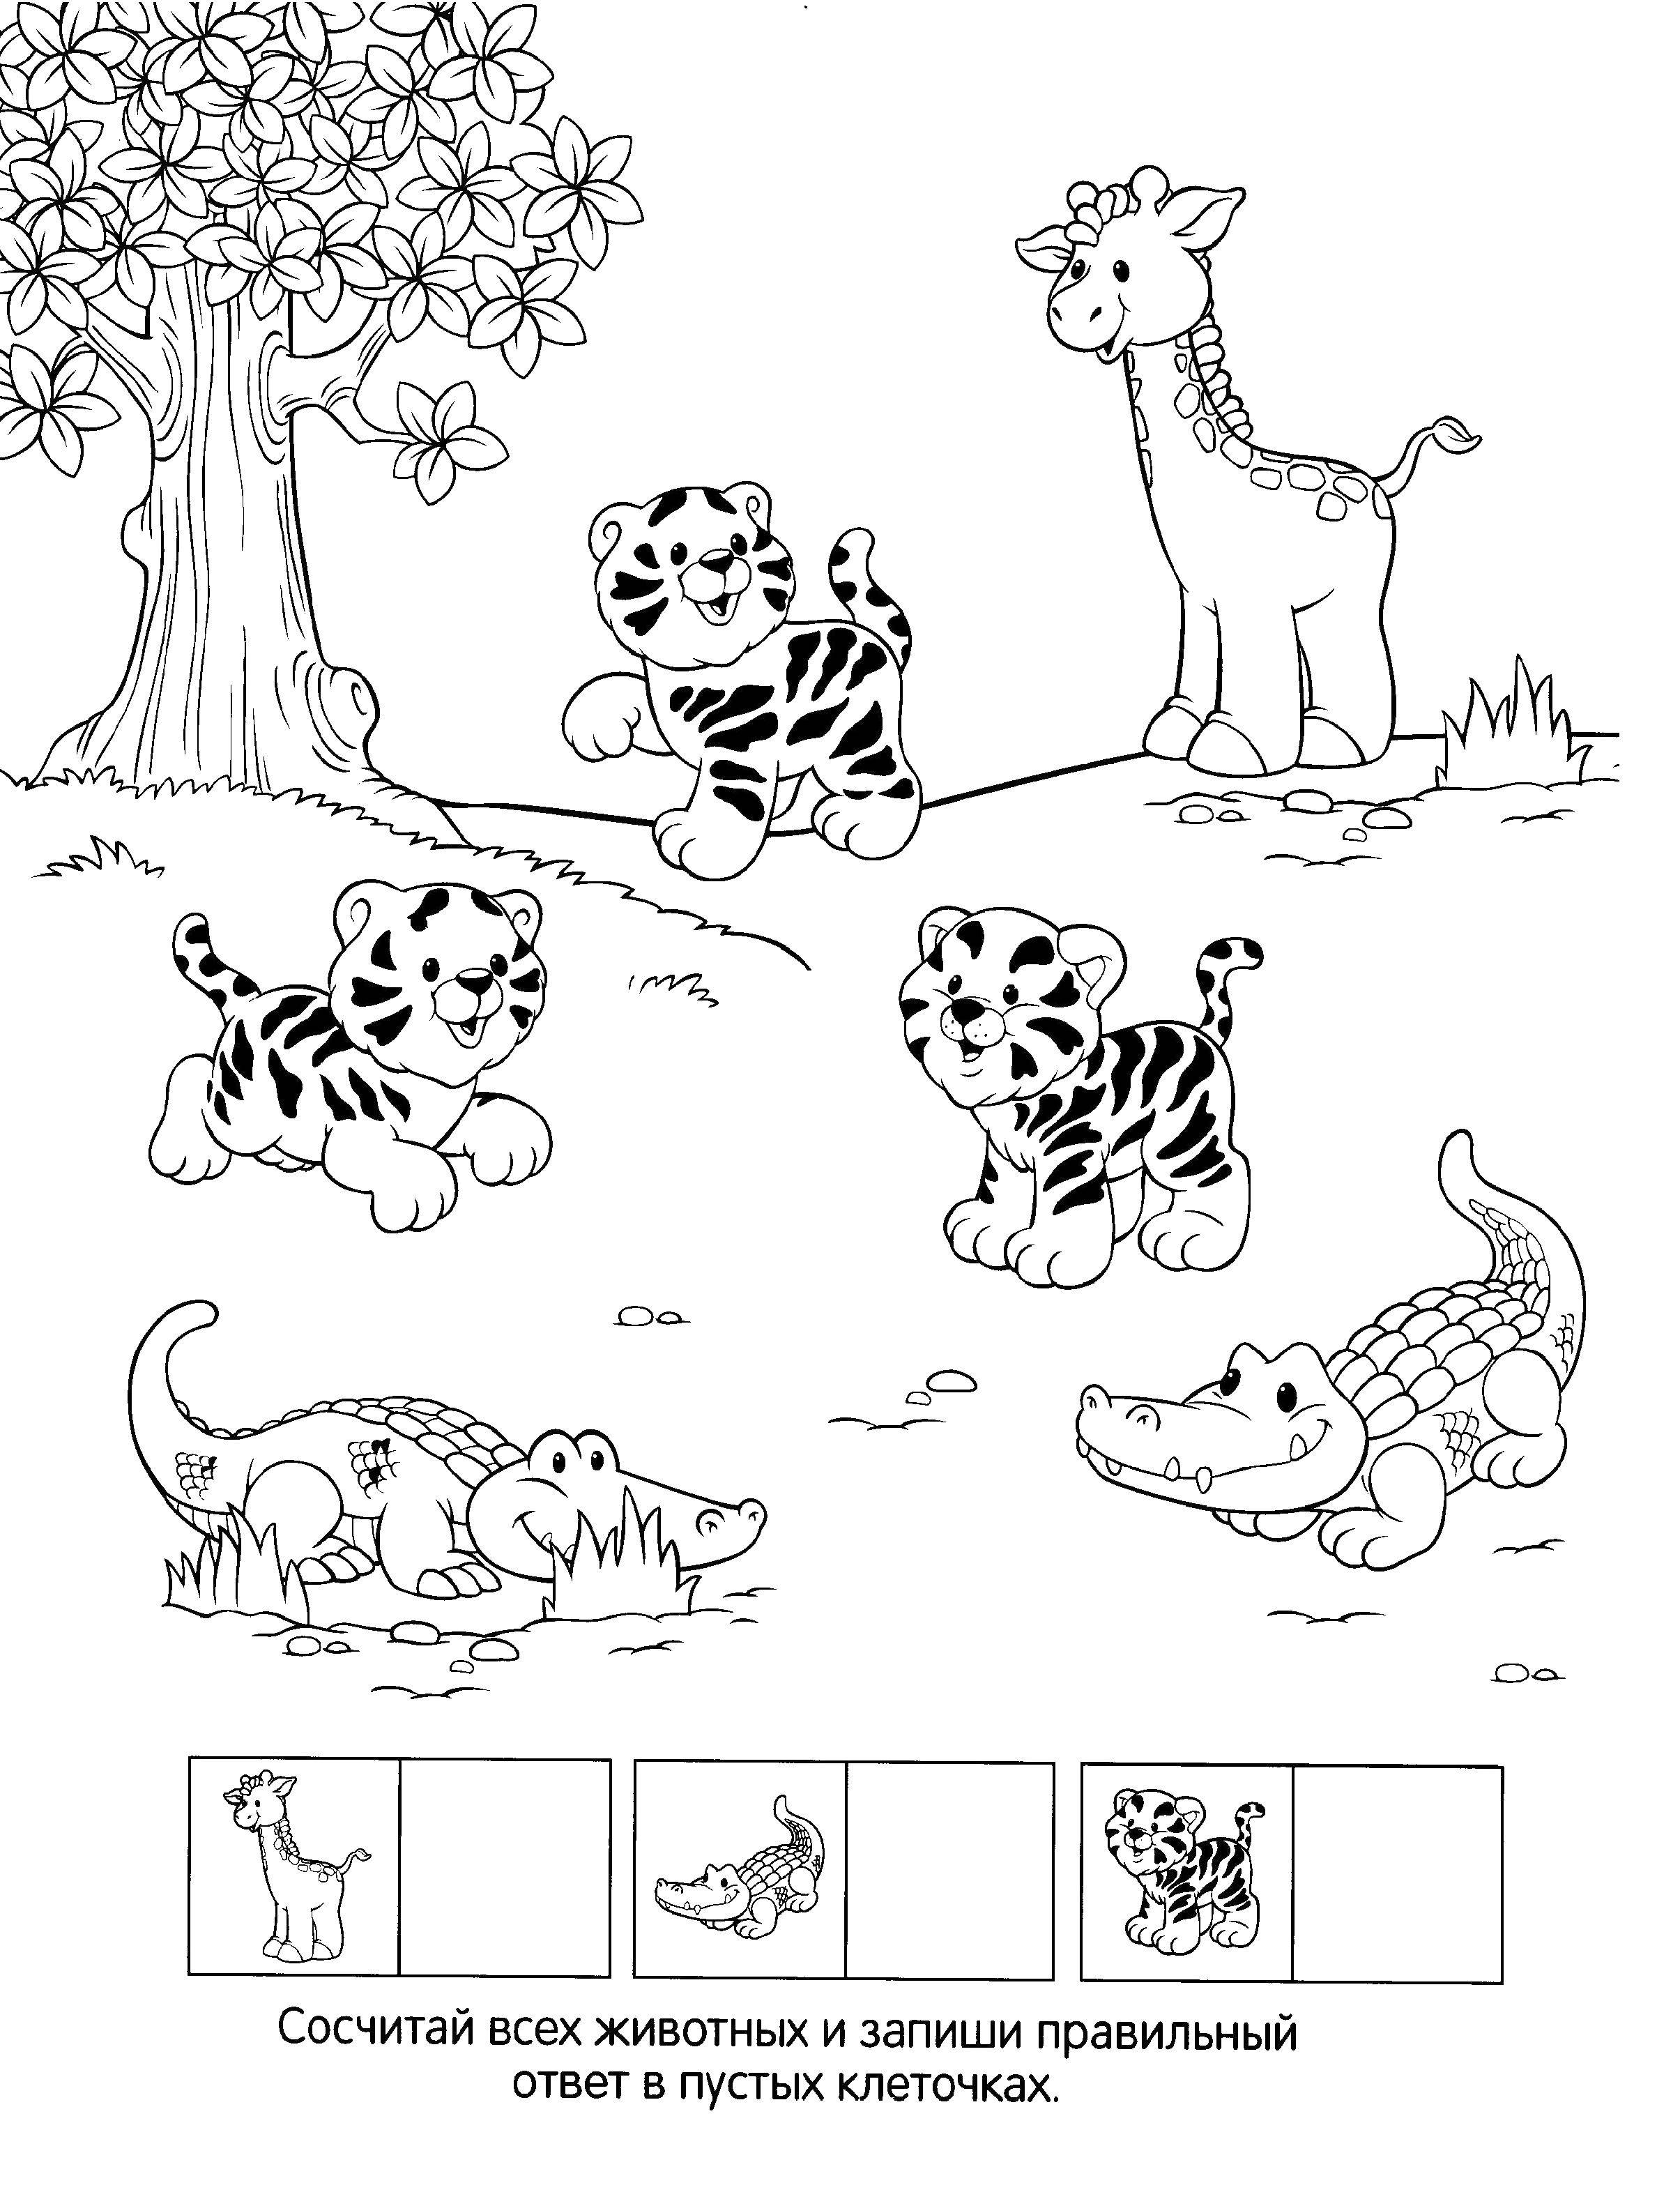 Coloring Count animals. Category on thinking. Tags:  on thinking, logic, problem, puzzle.